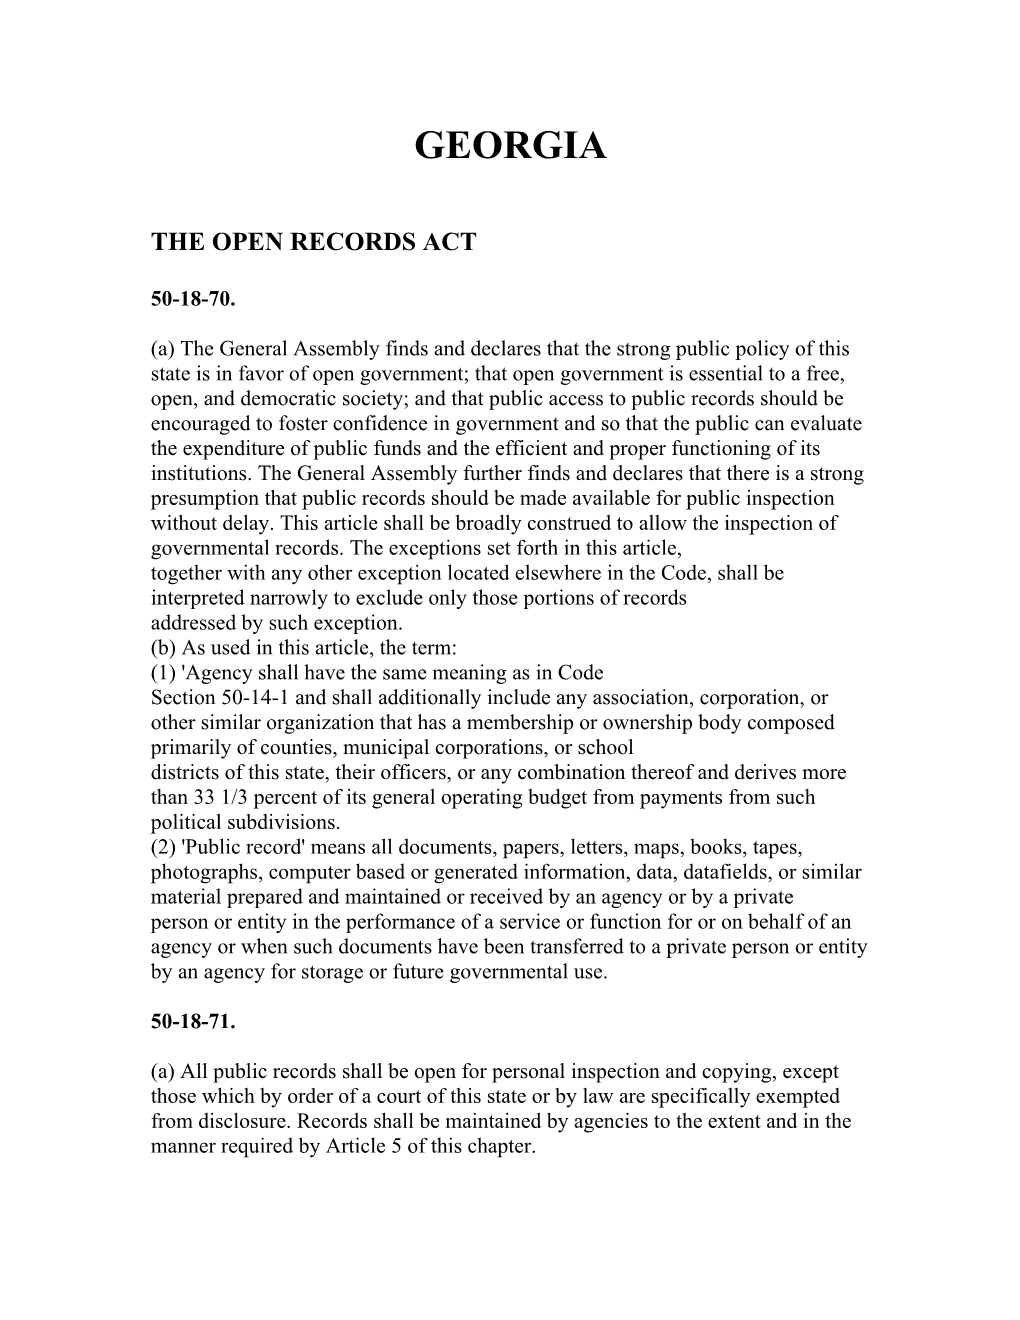 The Open Records Act